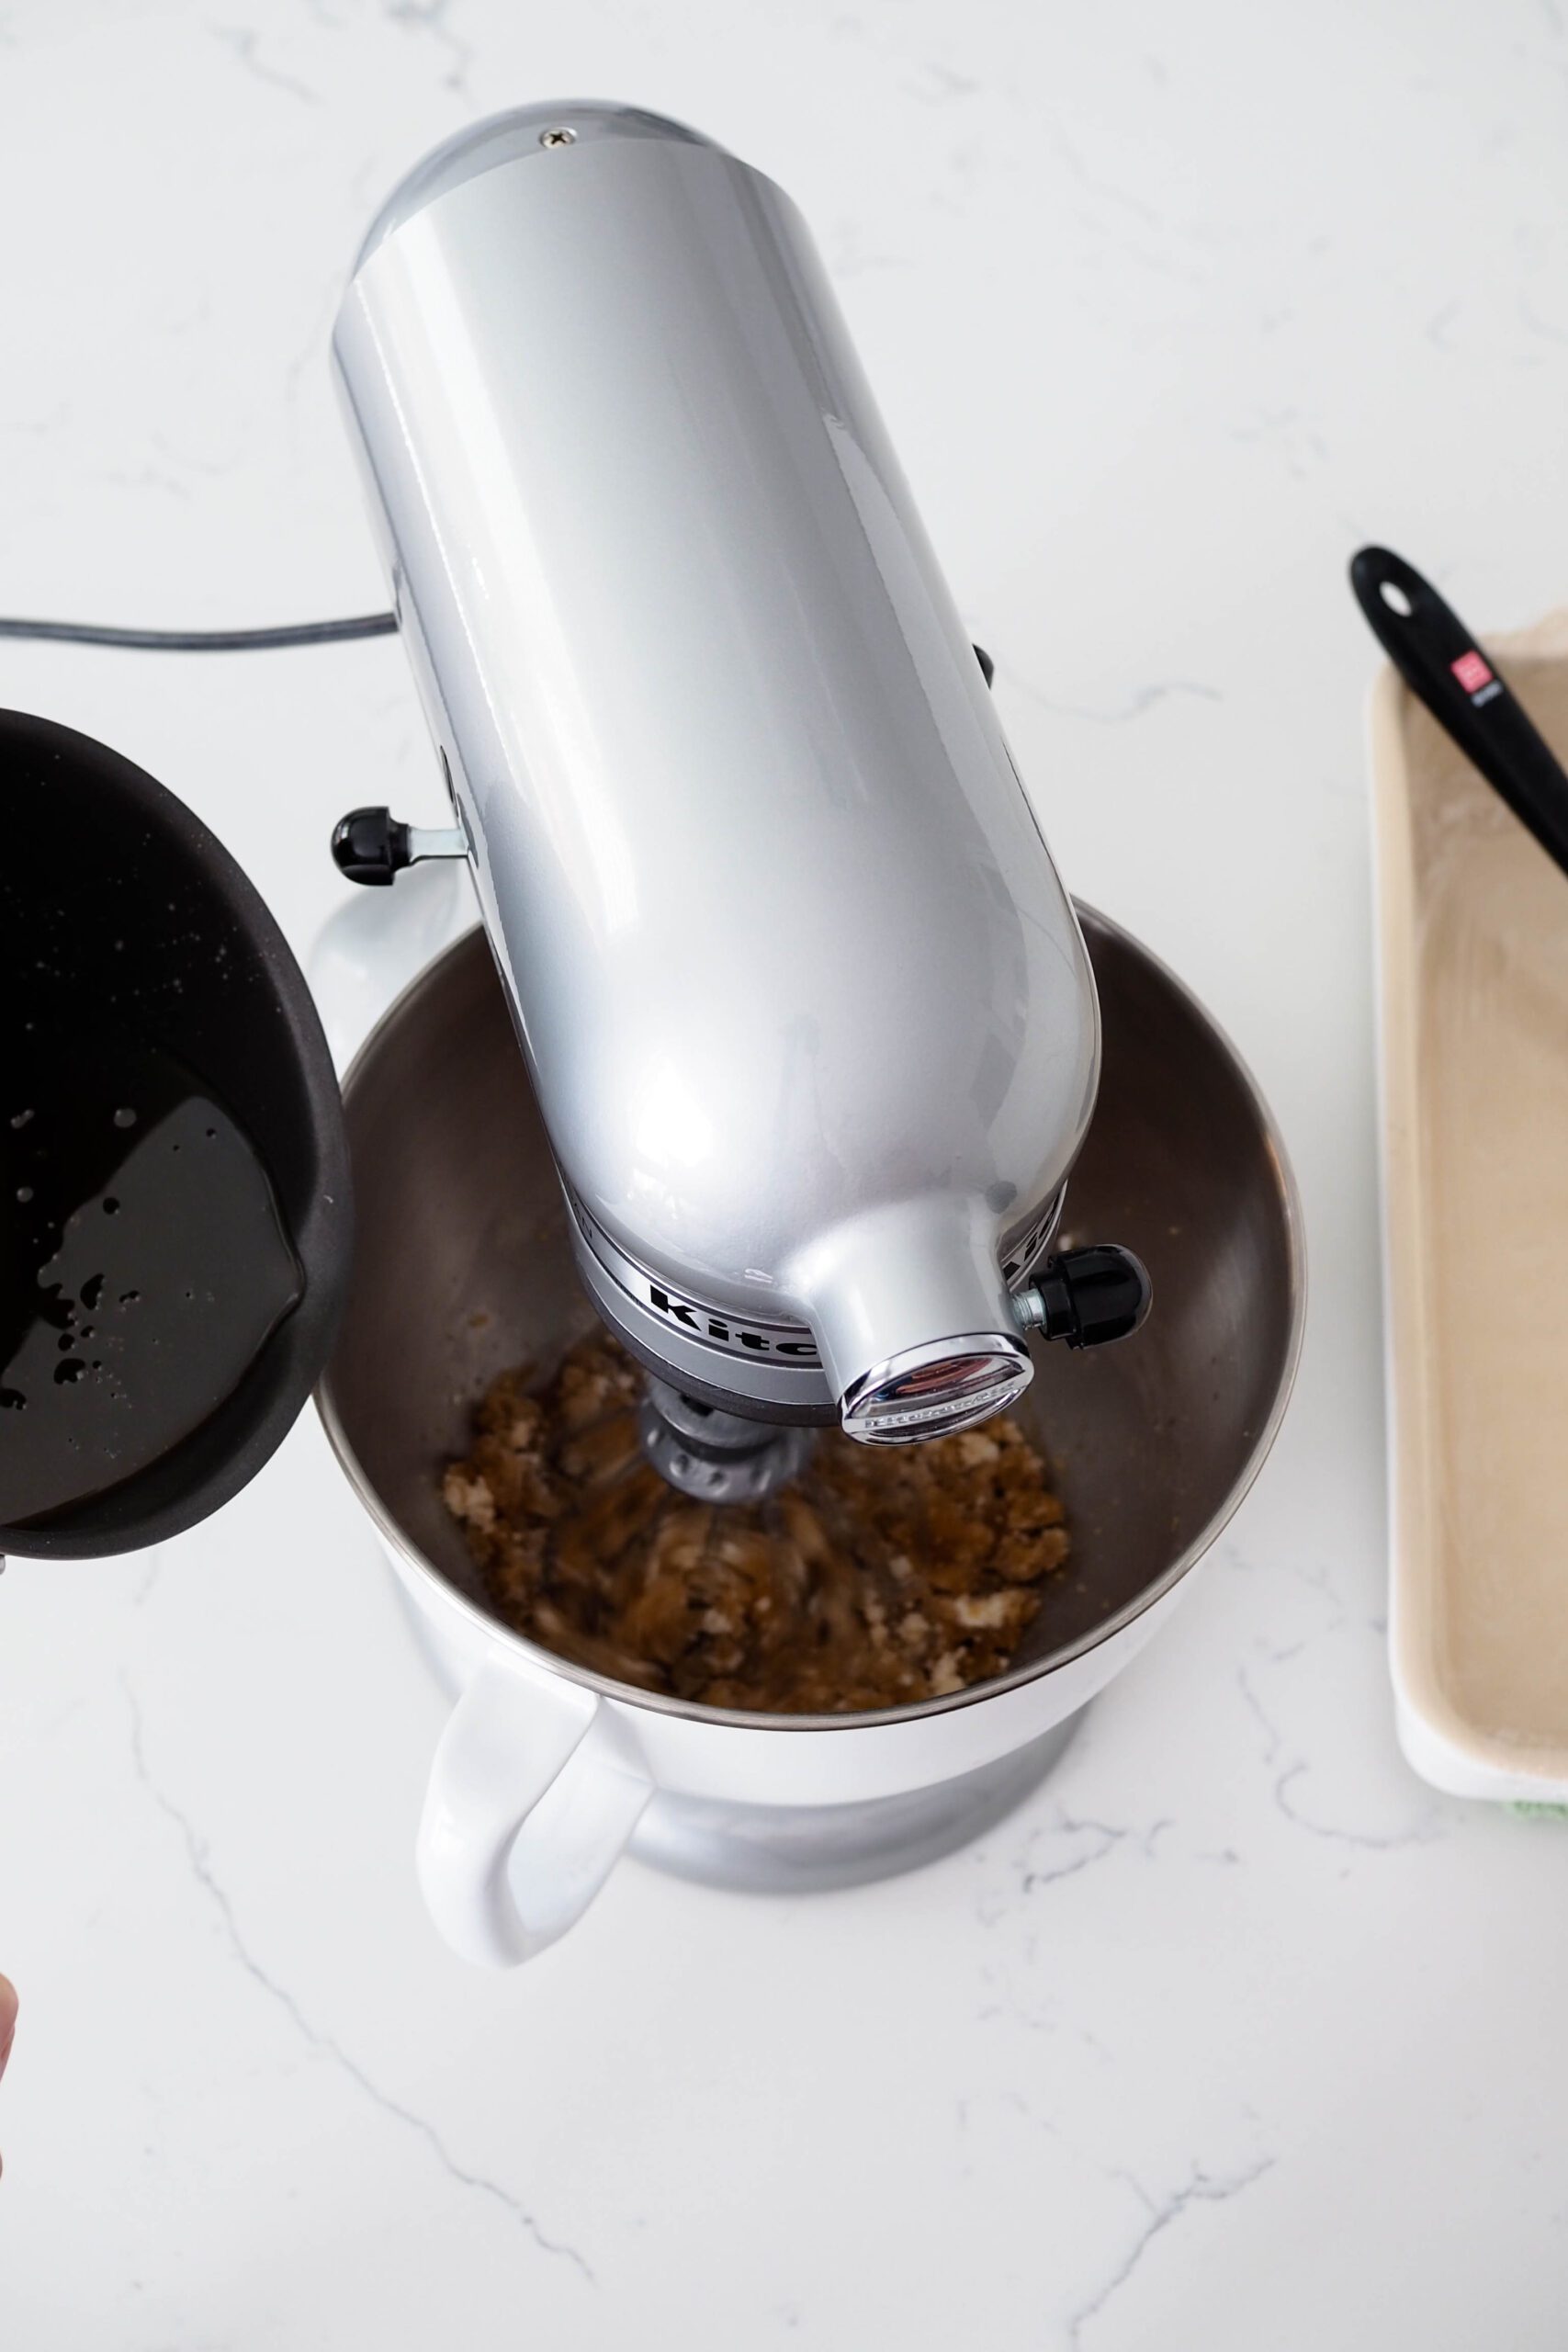 A pan begins to pour syrup into the bowl of a stand mixer.